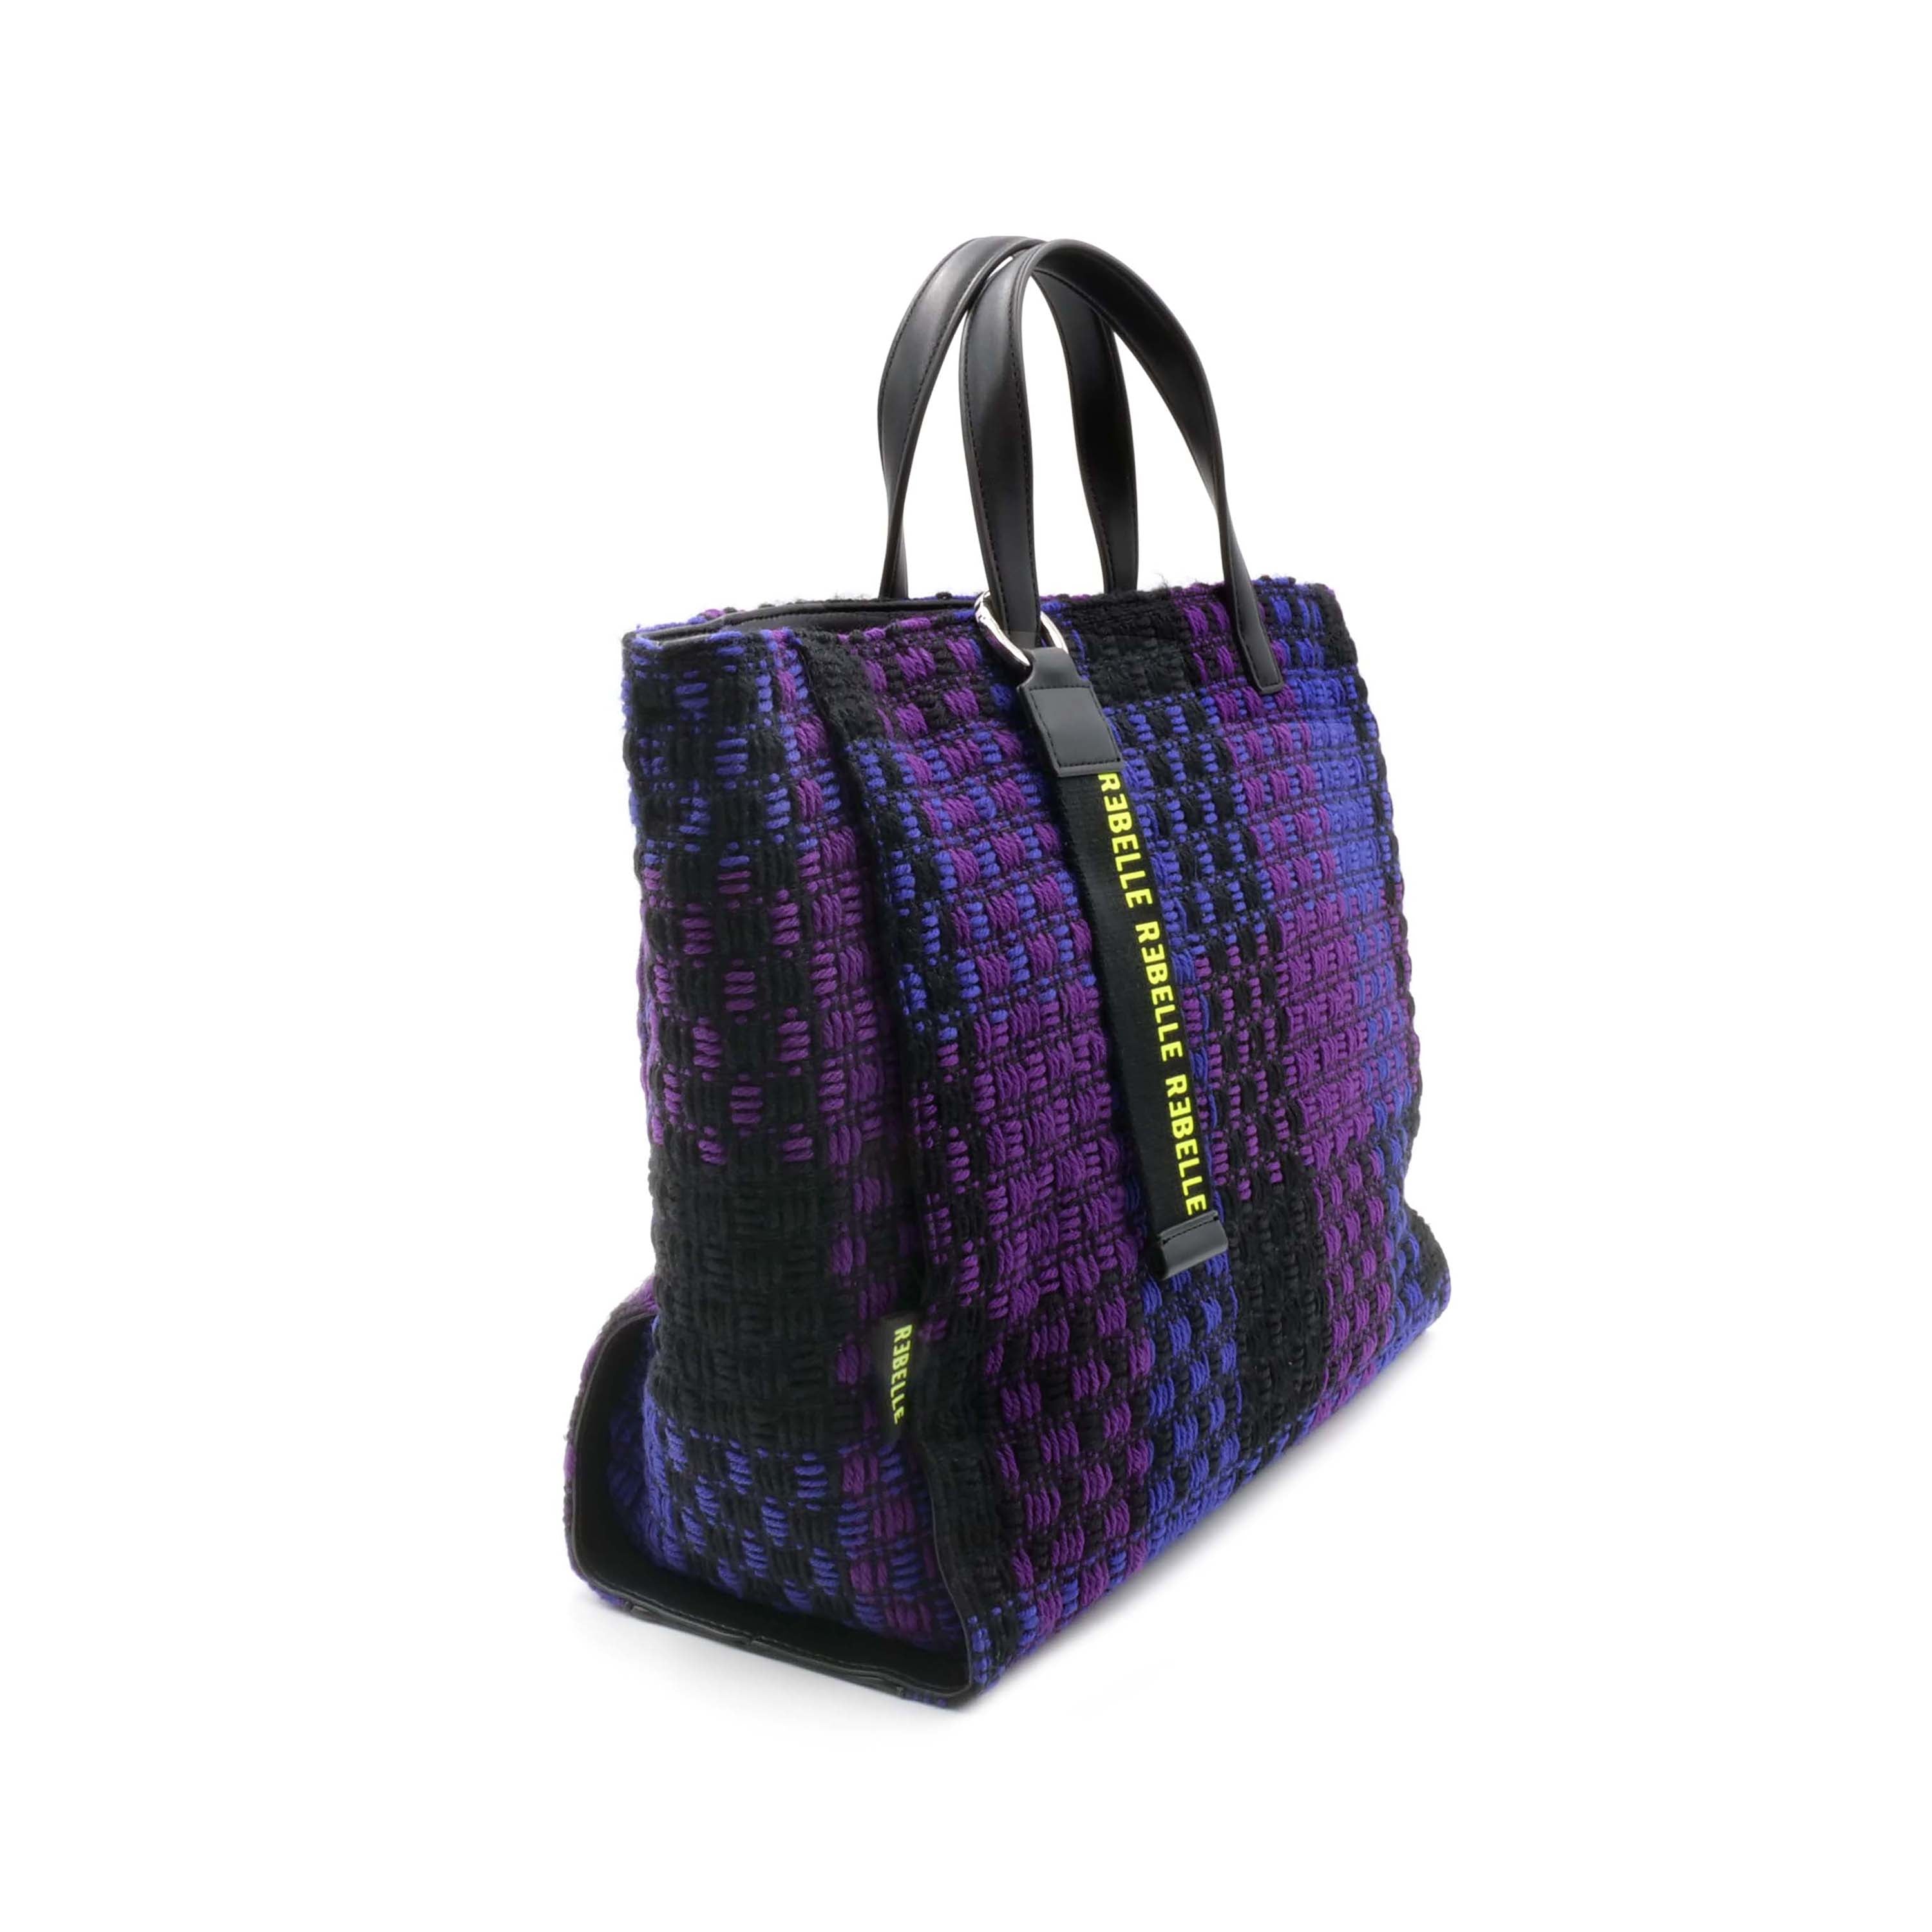 ASHANTI REBELLE CHECKED WIRE bag - VIOLET